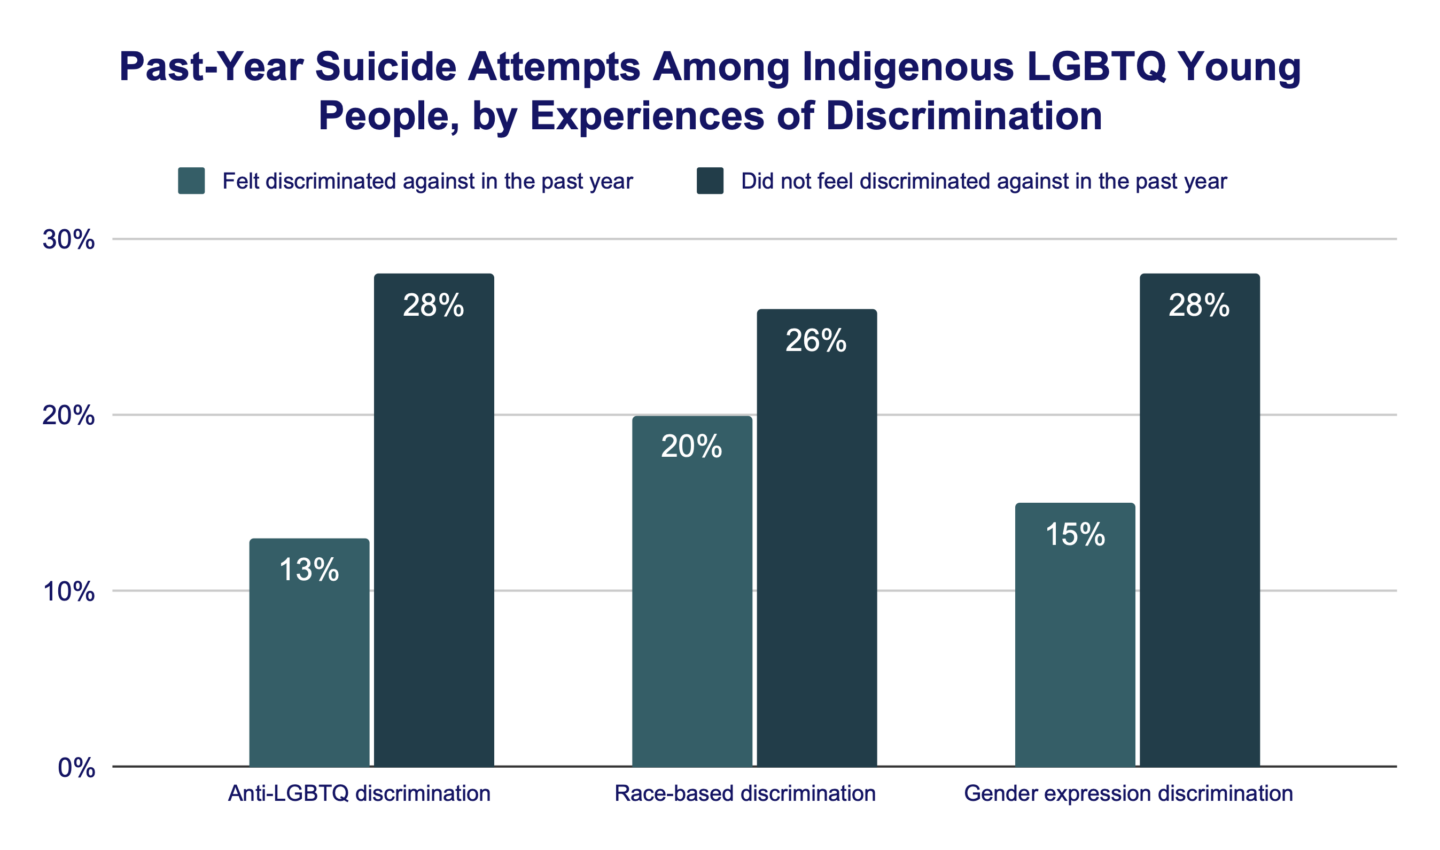 Past-Year Suicide Attempts Among Indigenous LGBTQ Young People, by Experiences of Discrimination